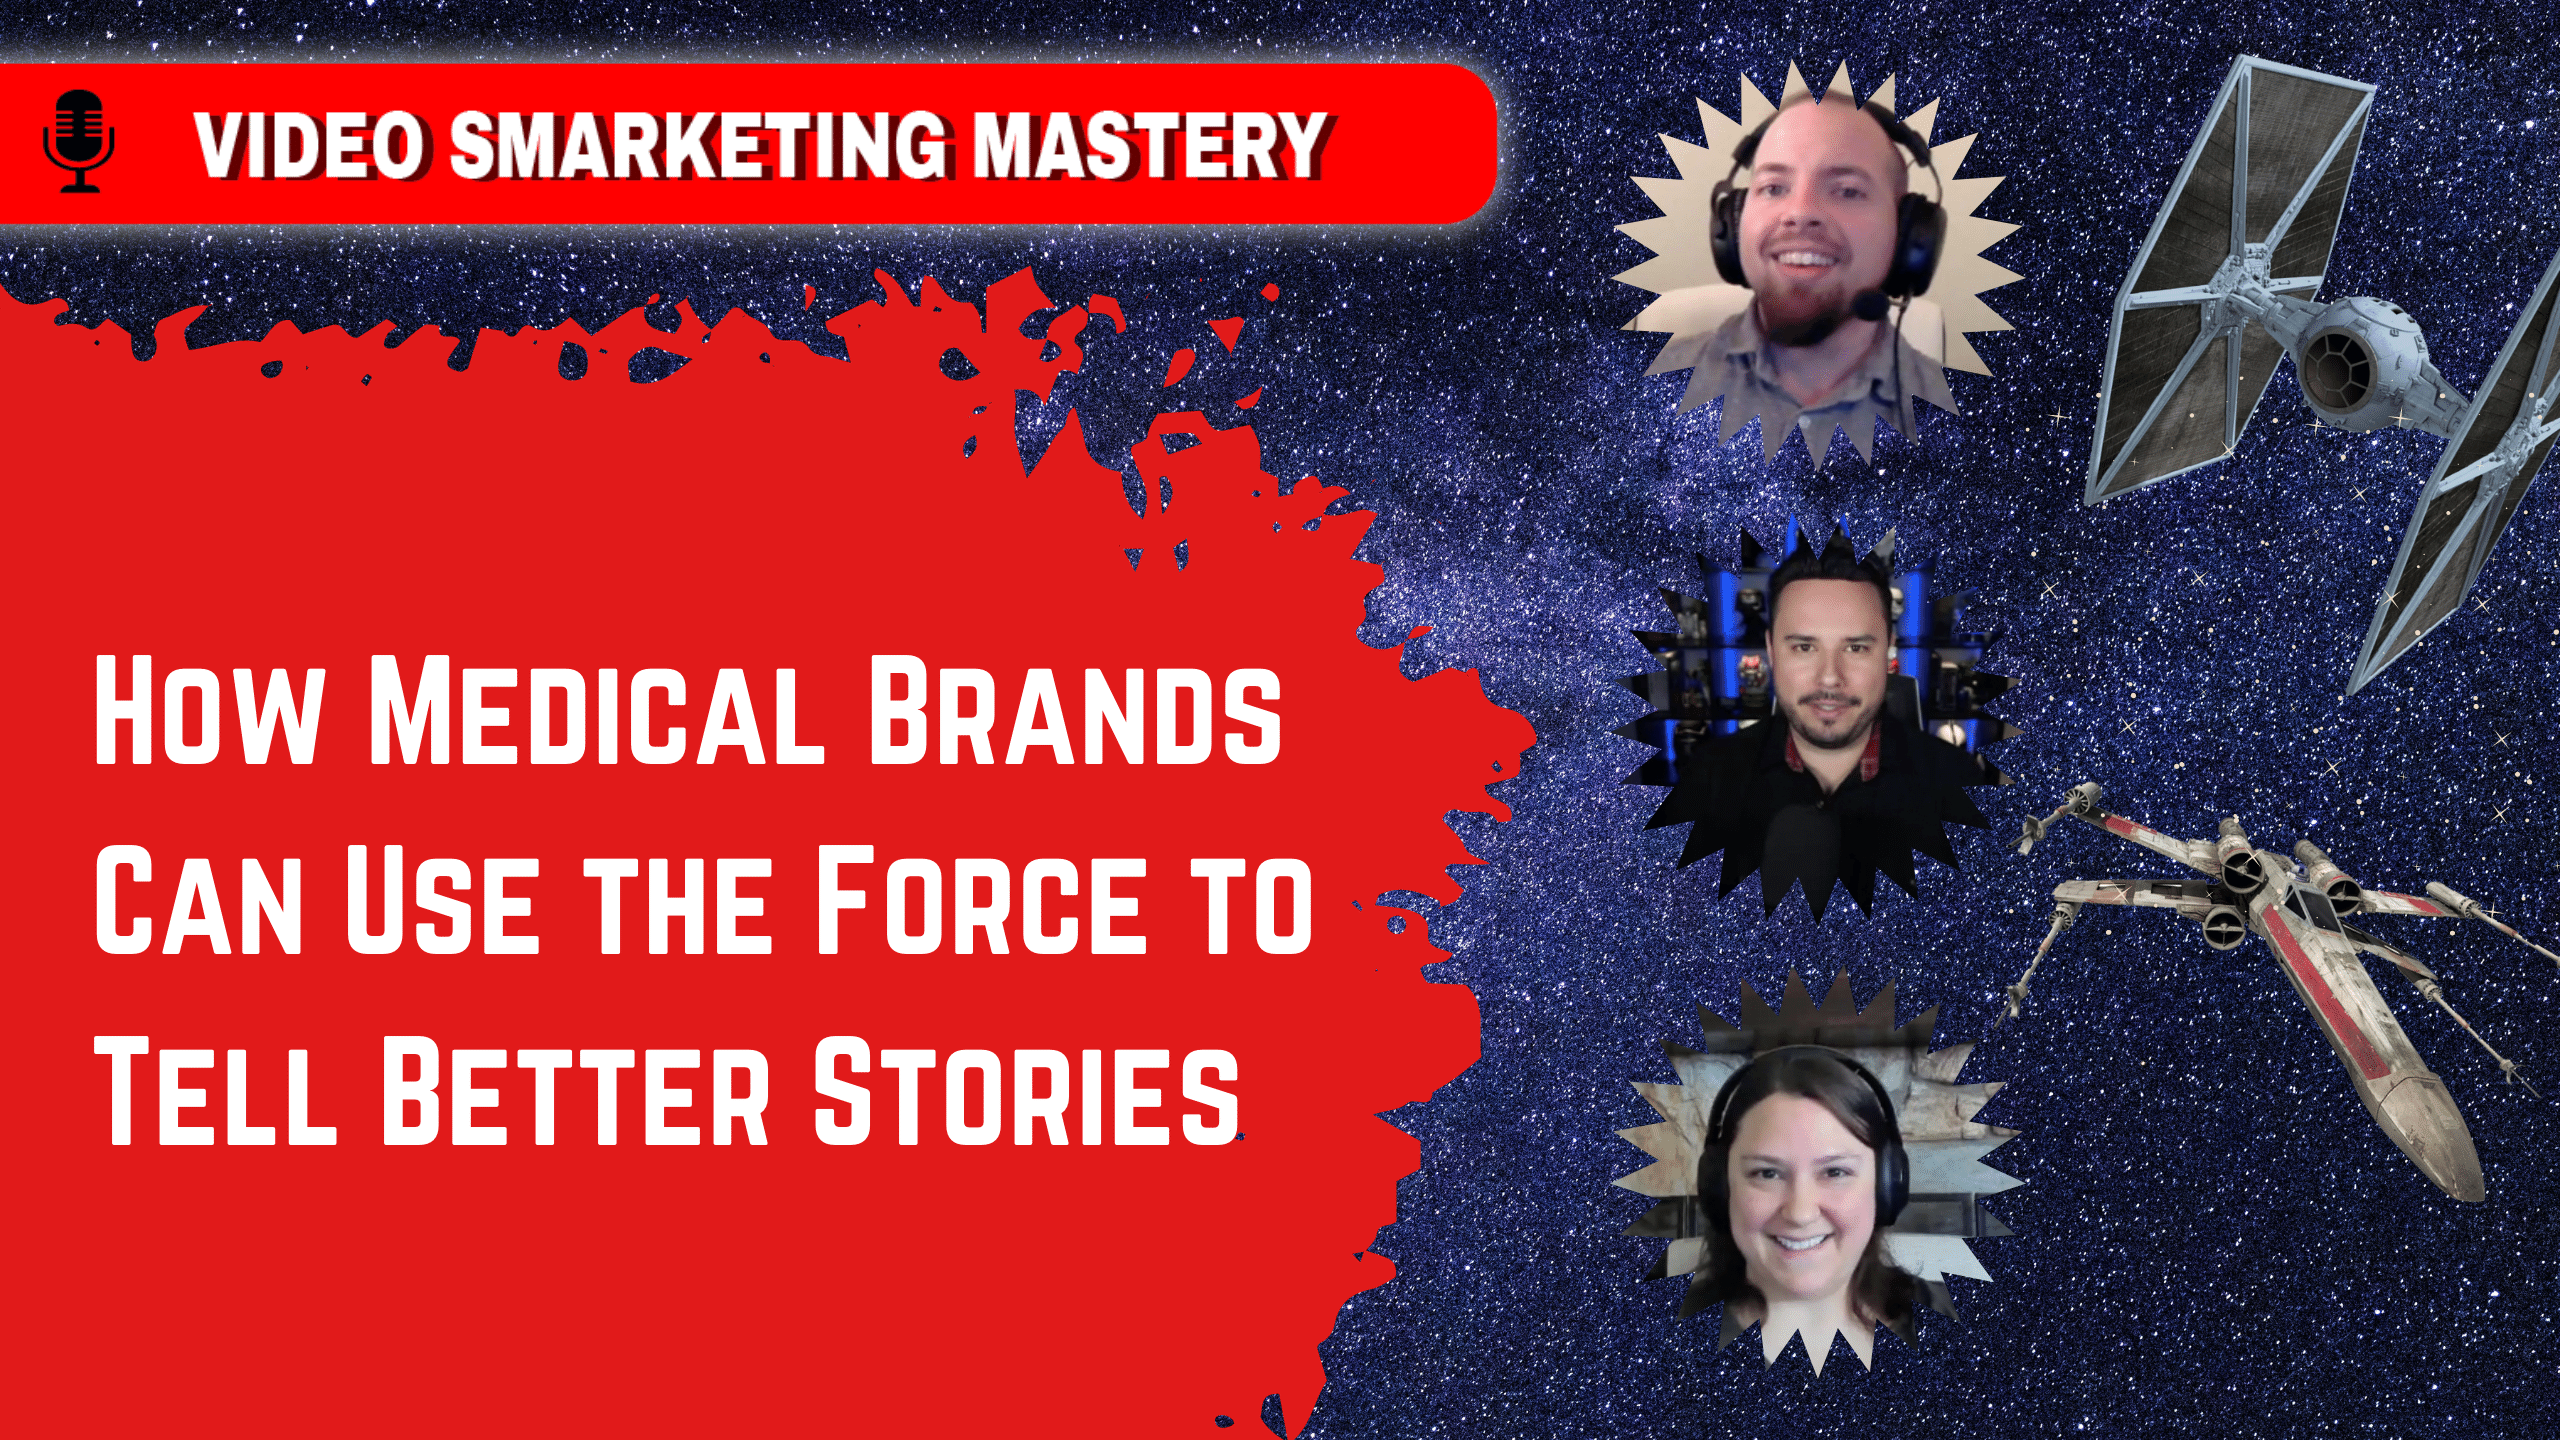 How Medical Brands Can Use the Force to Tell Better Stories